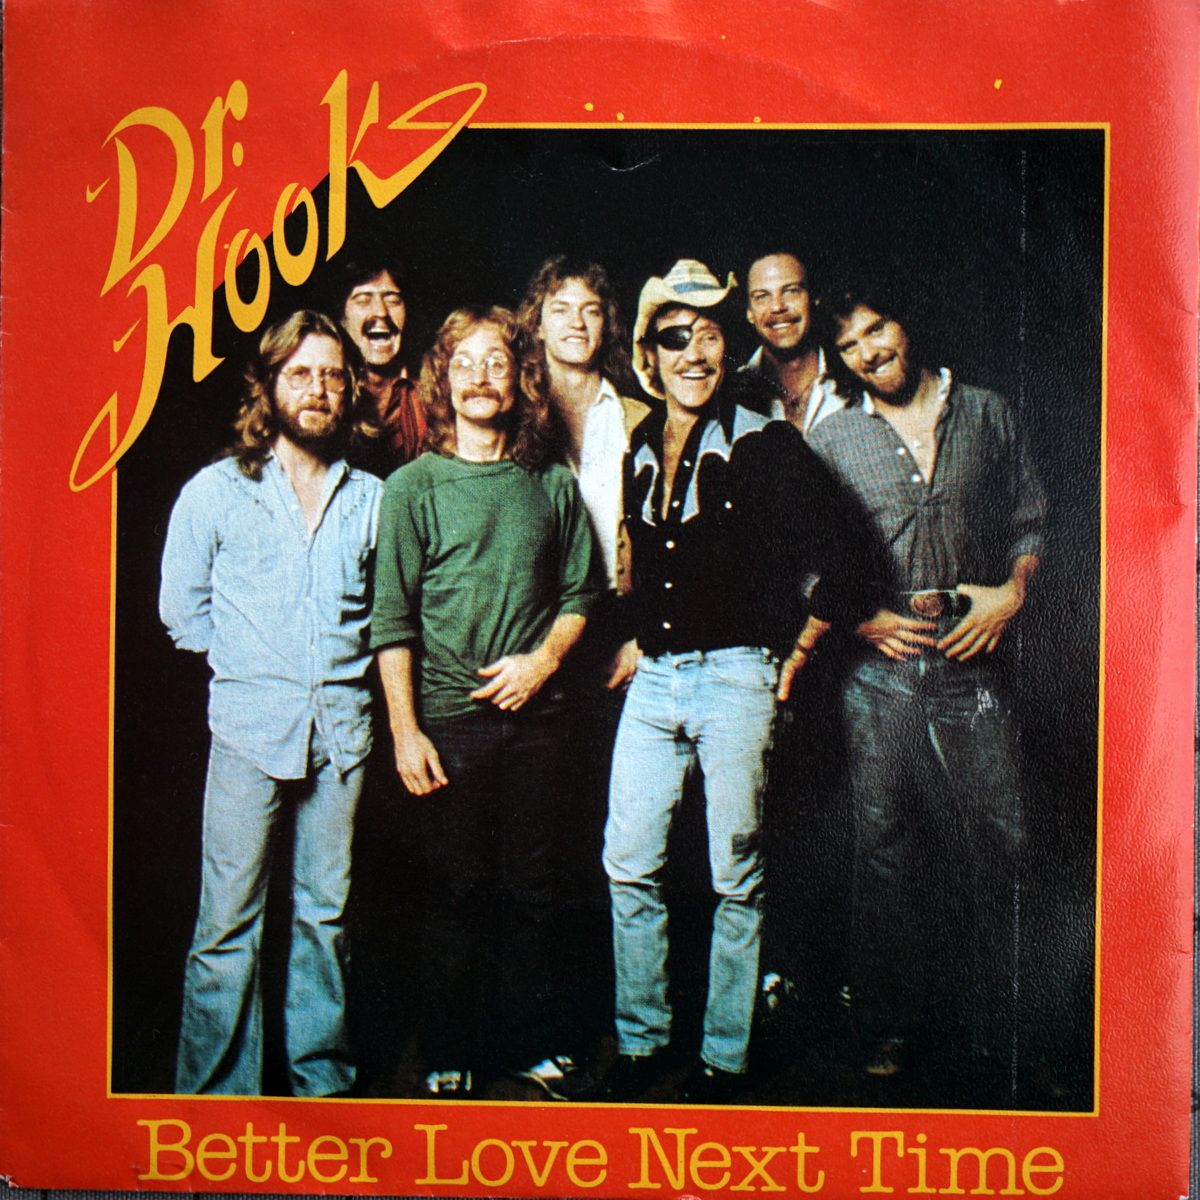 S SW A1 - 7C 006-86055 Red Cover - Better Love Next Time - 1979 - Scan